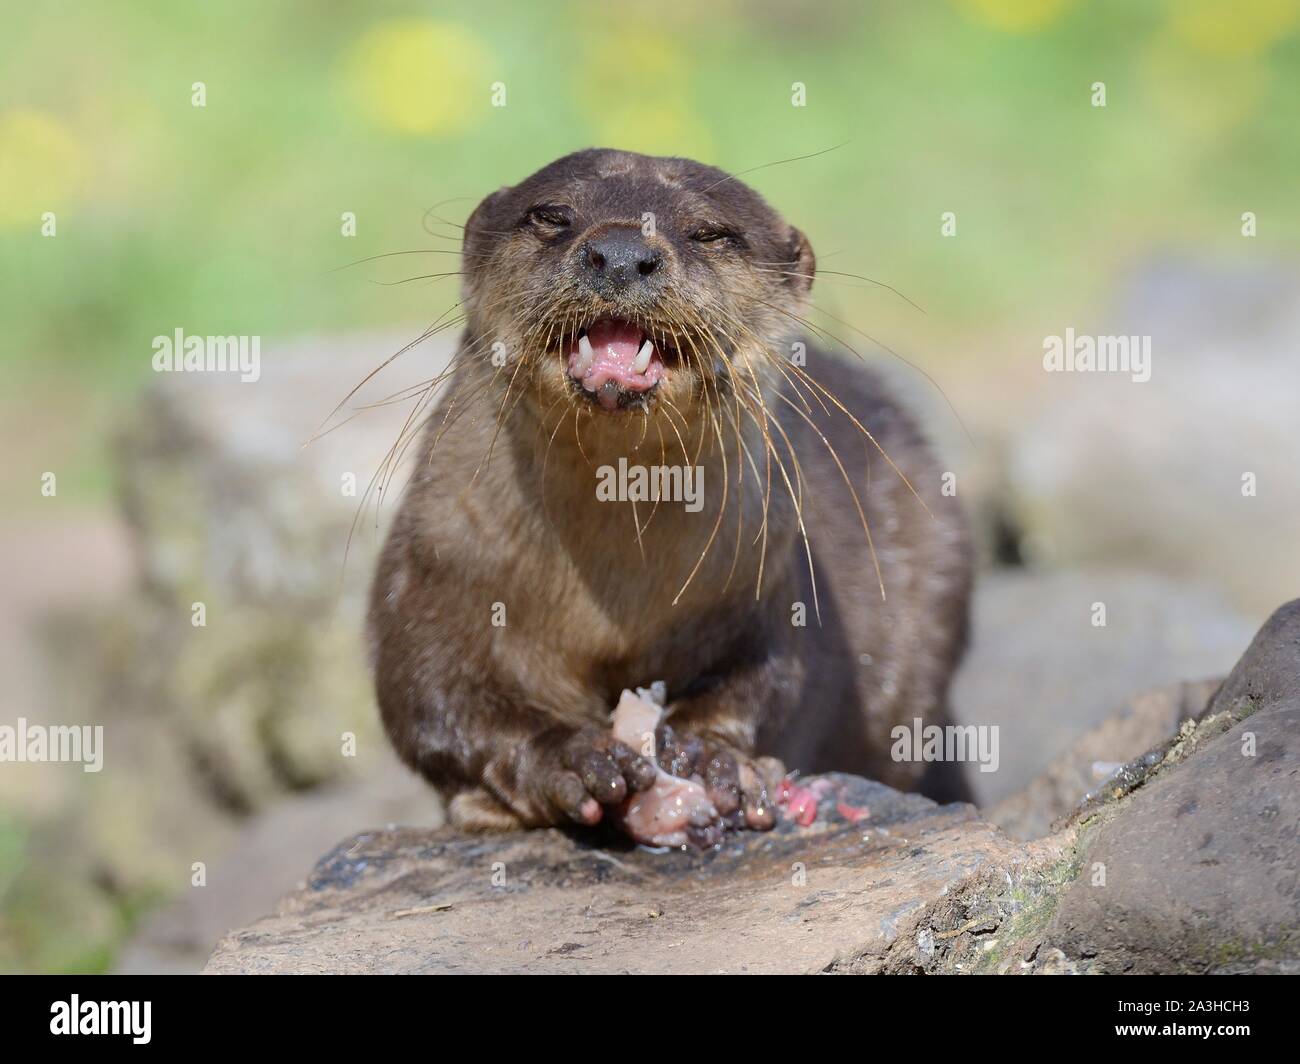 Asian short-clawed otter (Aonyx cinerea) eating a fish, Dartmoor Otter Sanctuary, Devon, UK, March. Stock Photo